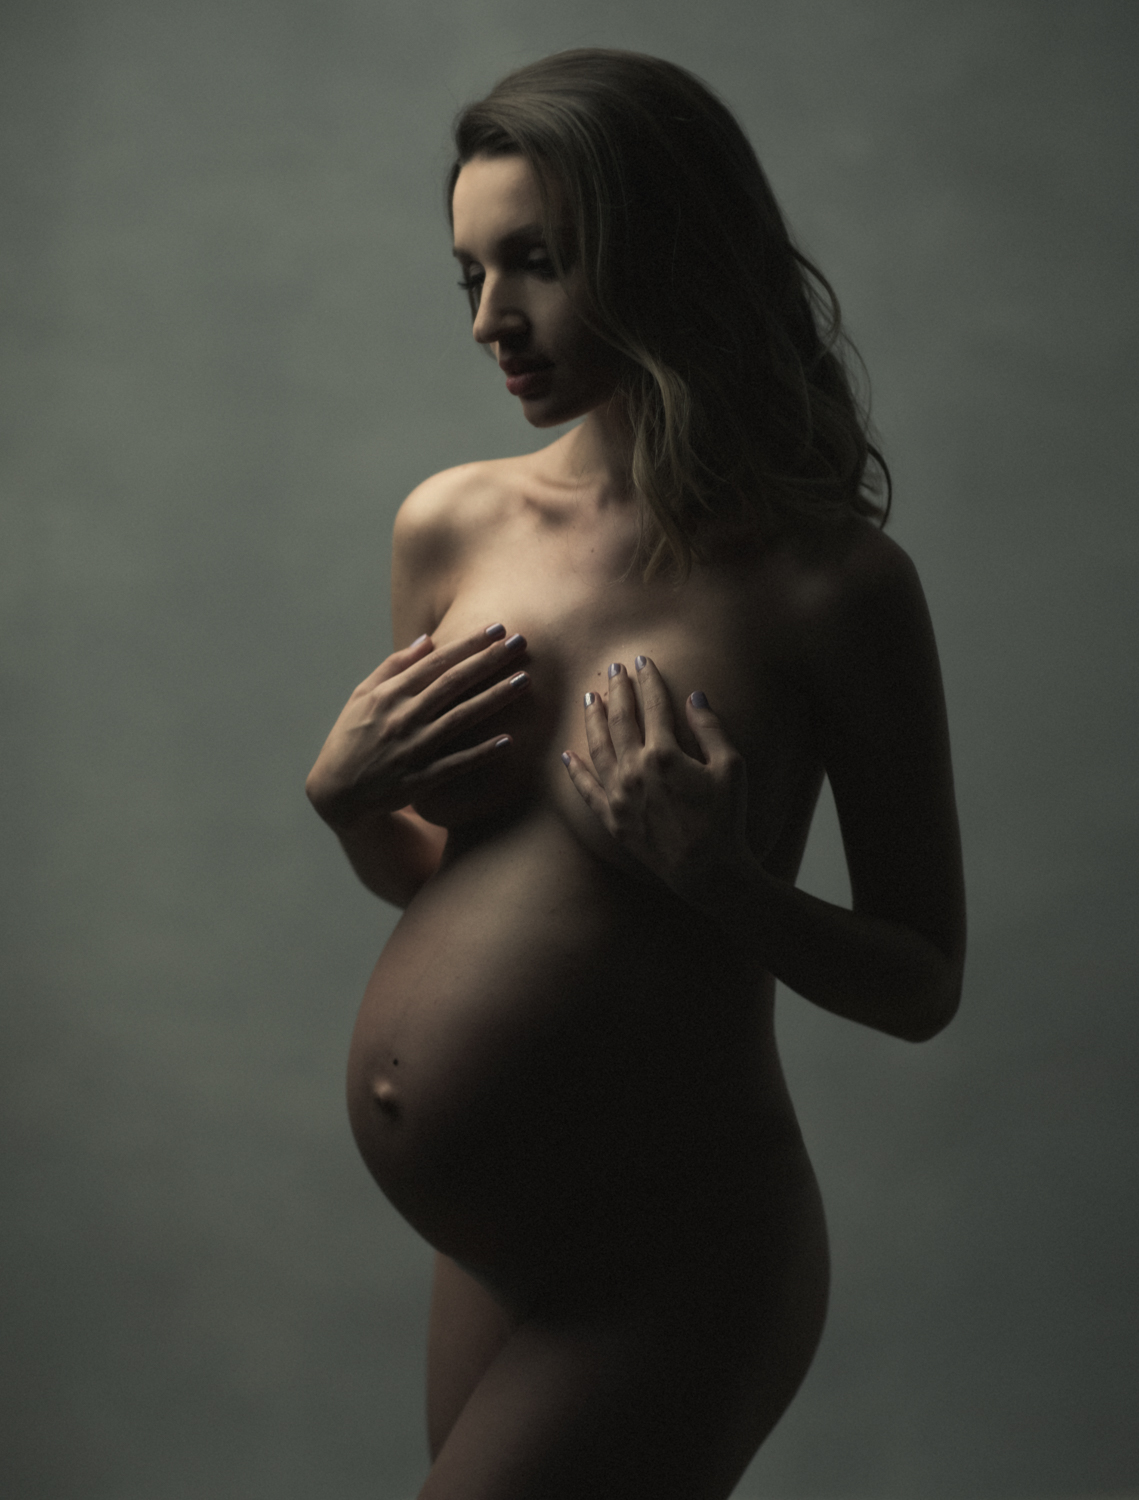 Glowing expecting mother portrait. NYC maternity photos by Lola Melani